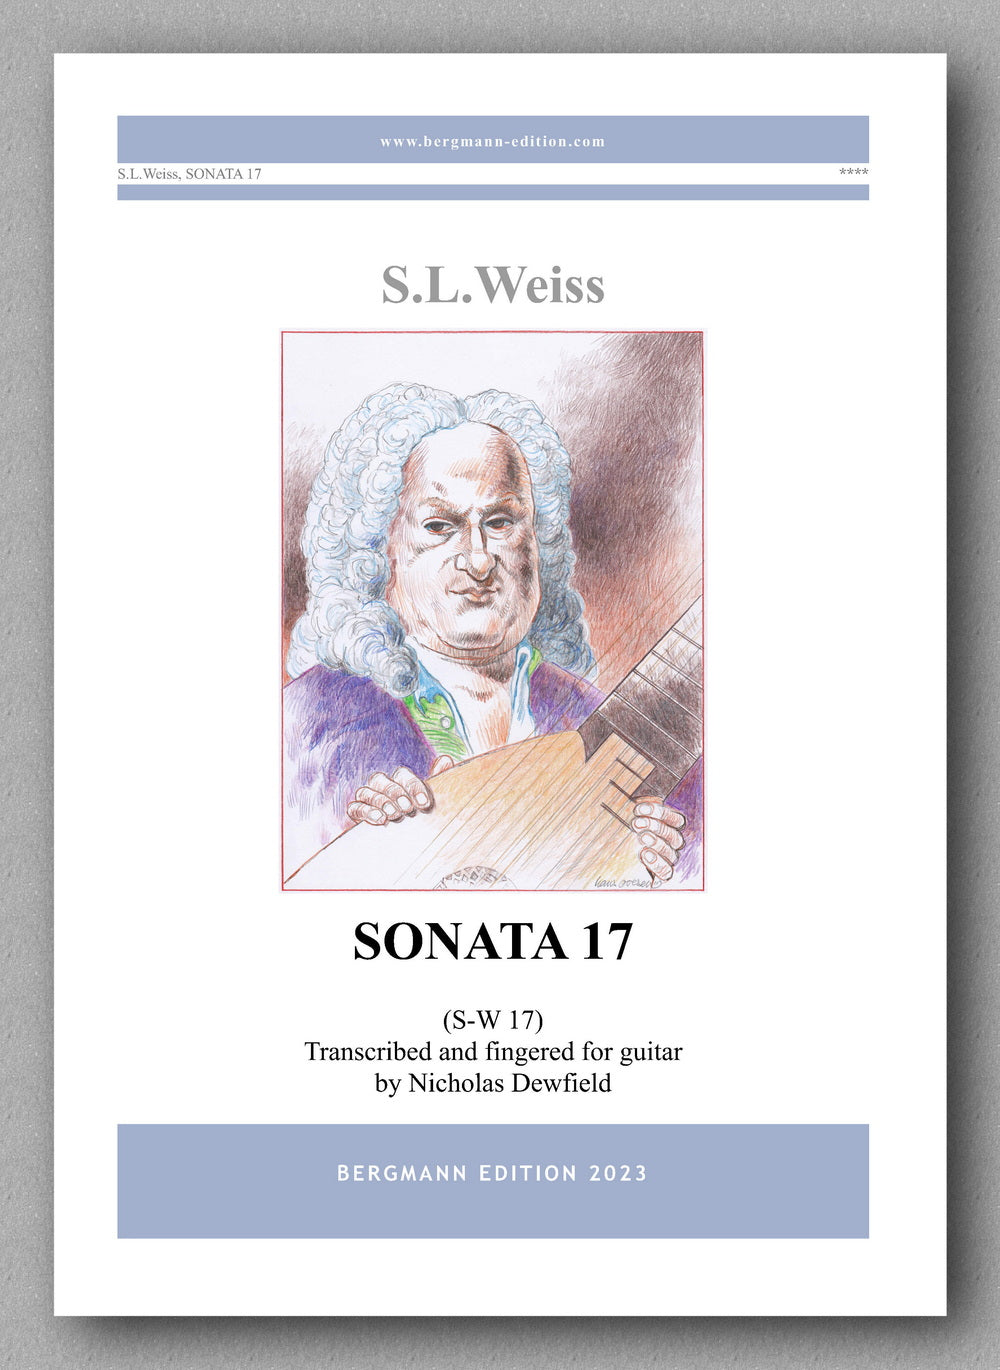 Sylvius Leopold Weiss (1687-1750), Sonata No. 17 - preview of the cover